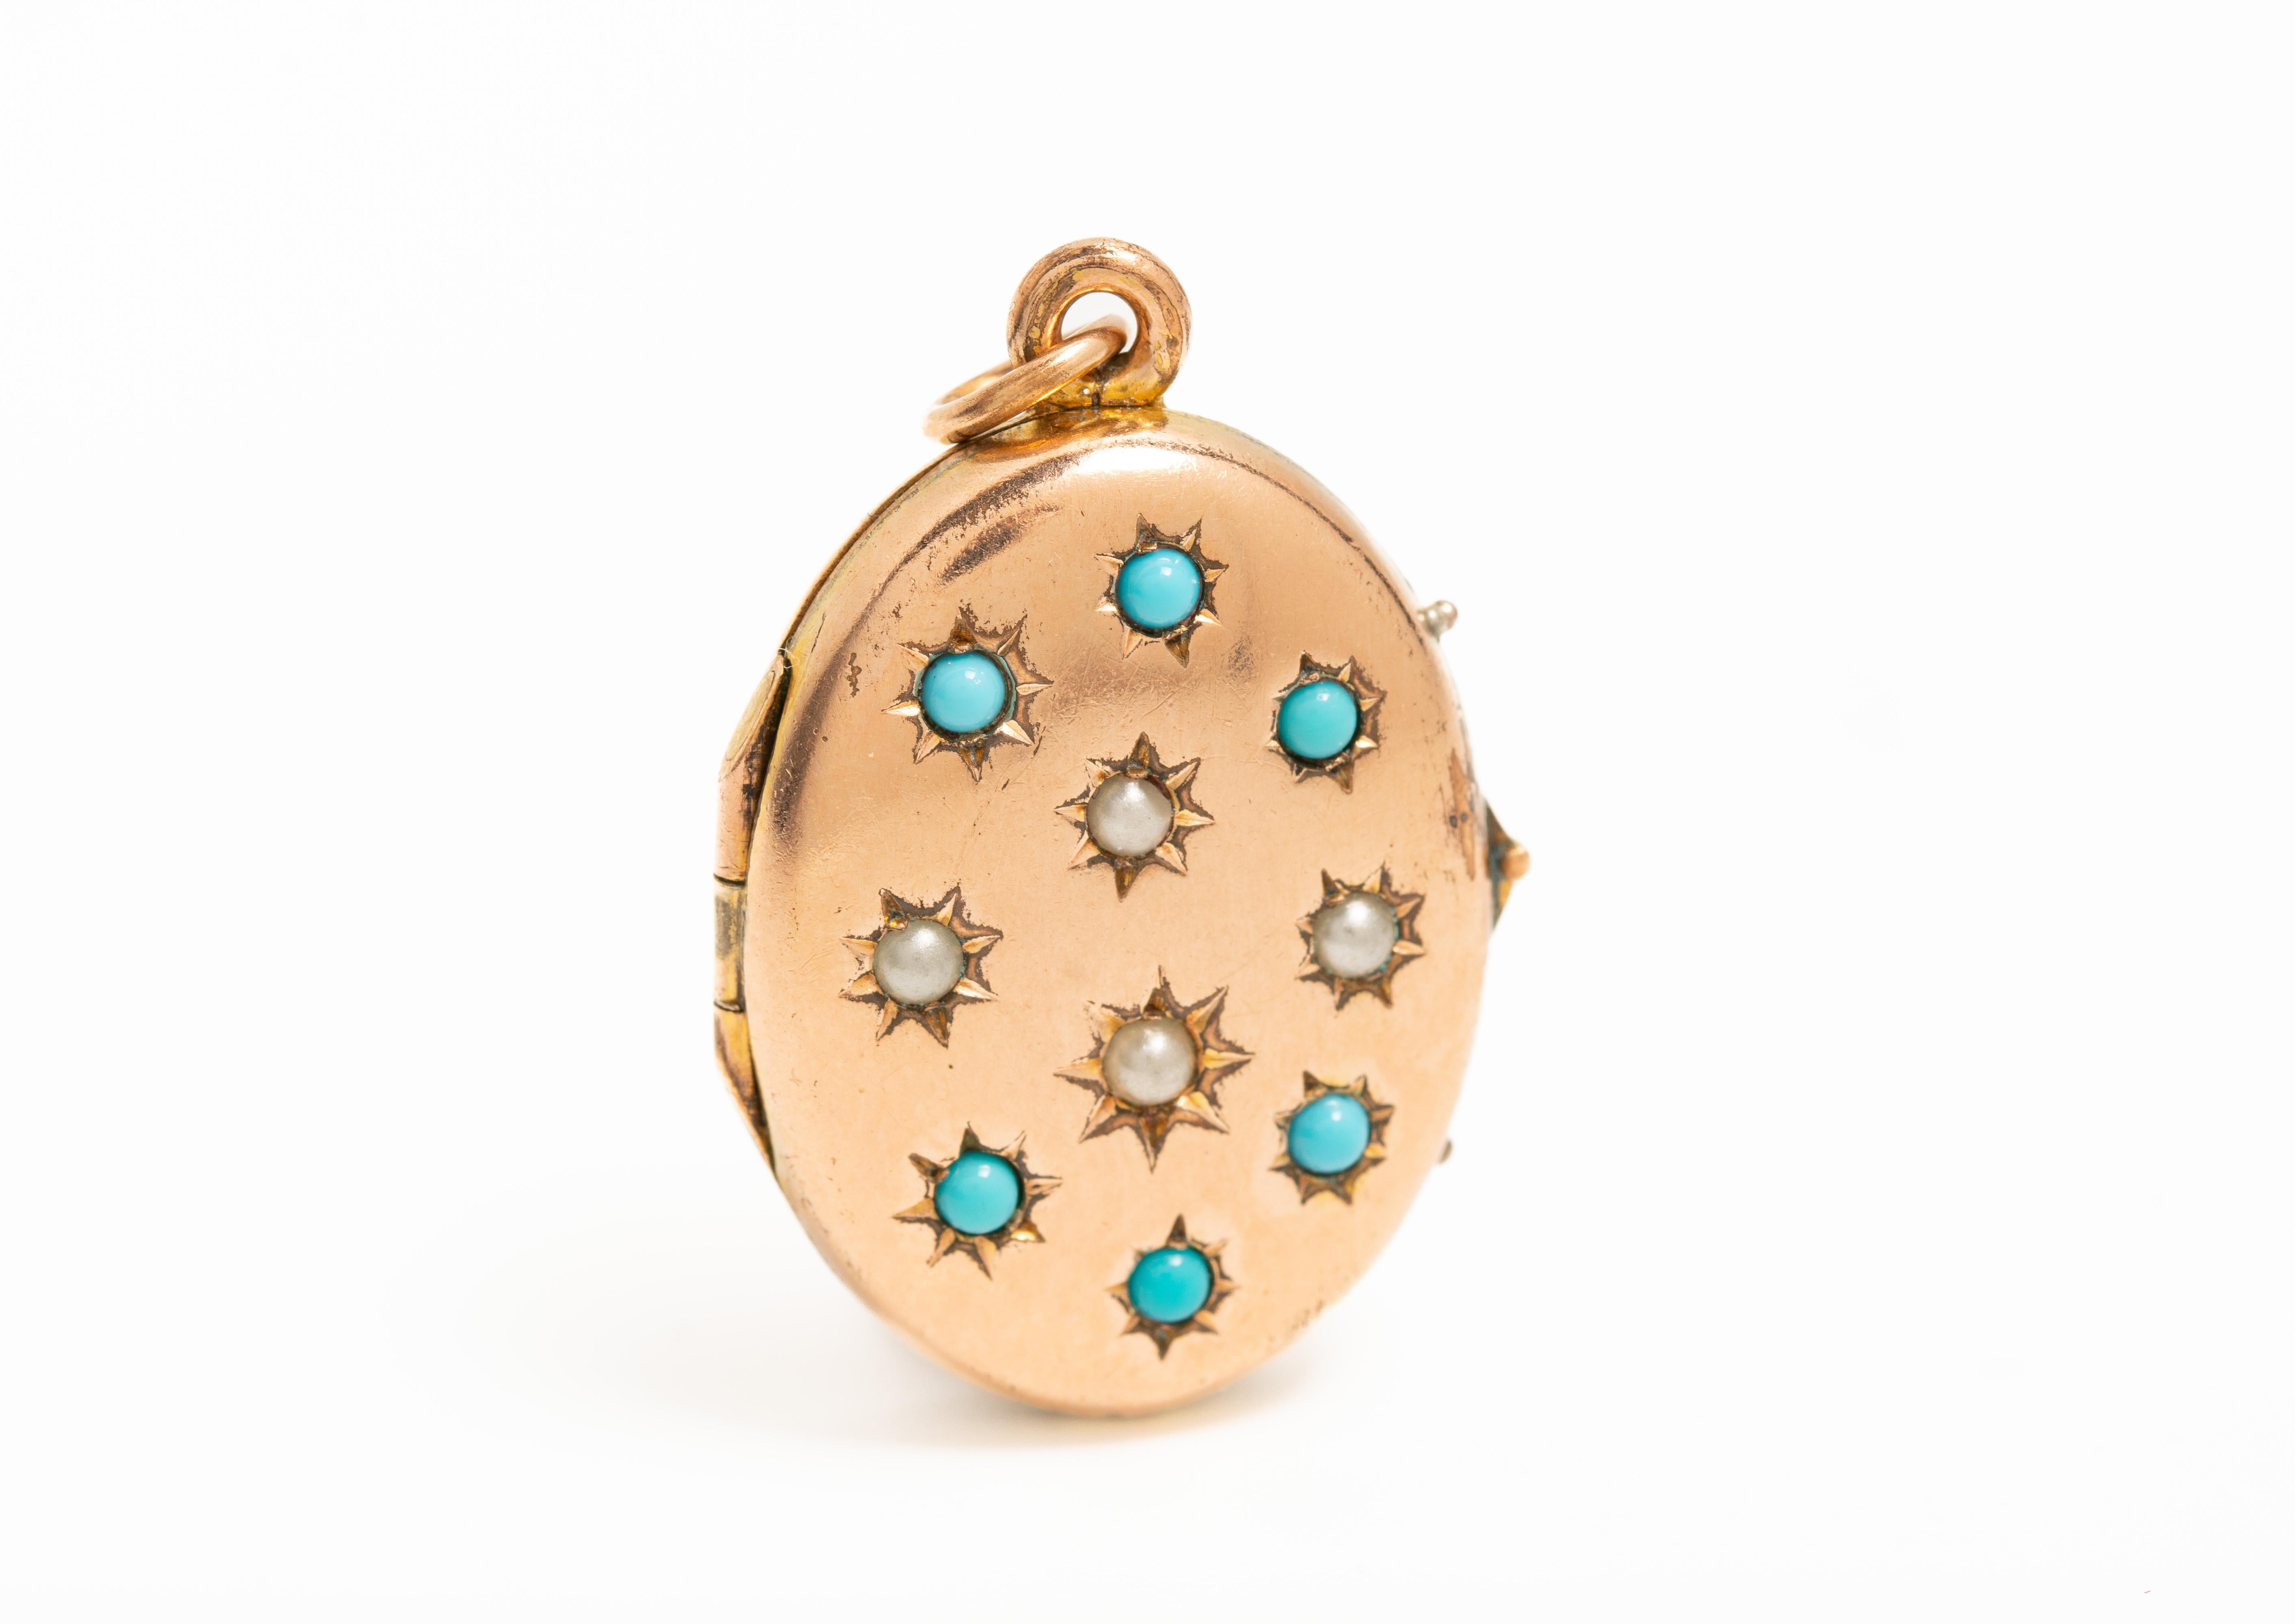 This stunning Victorian 9ct gold front and back locket is exquisitely adorned with a natural turquoise gemstones and delicate seed pearls in a form of the star. The locket opens to reveal two compartments for the photographs.

WEIGHT: 3.8